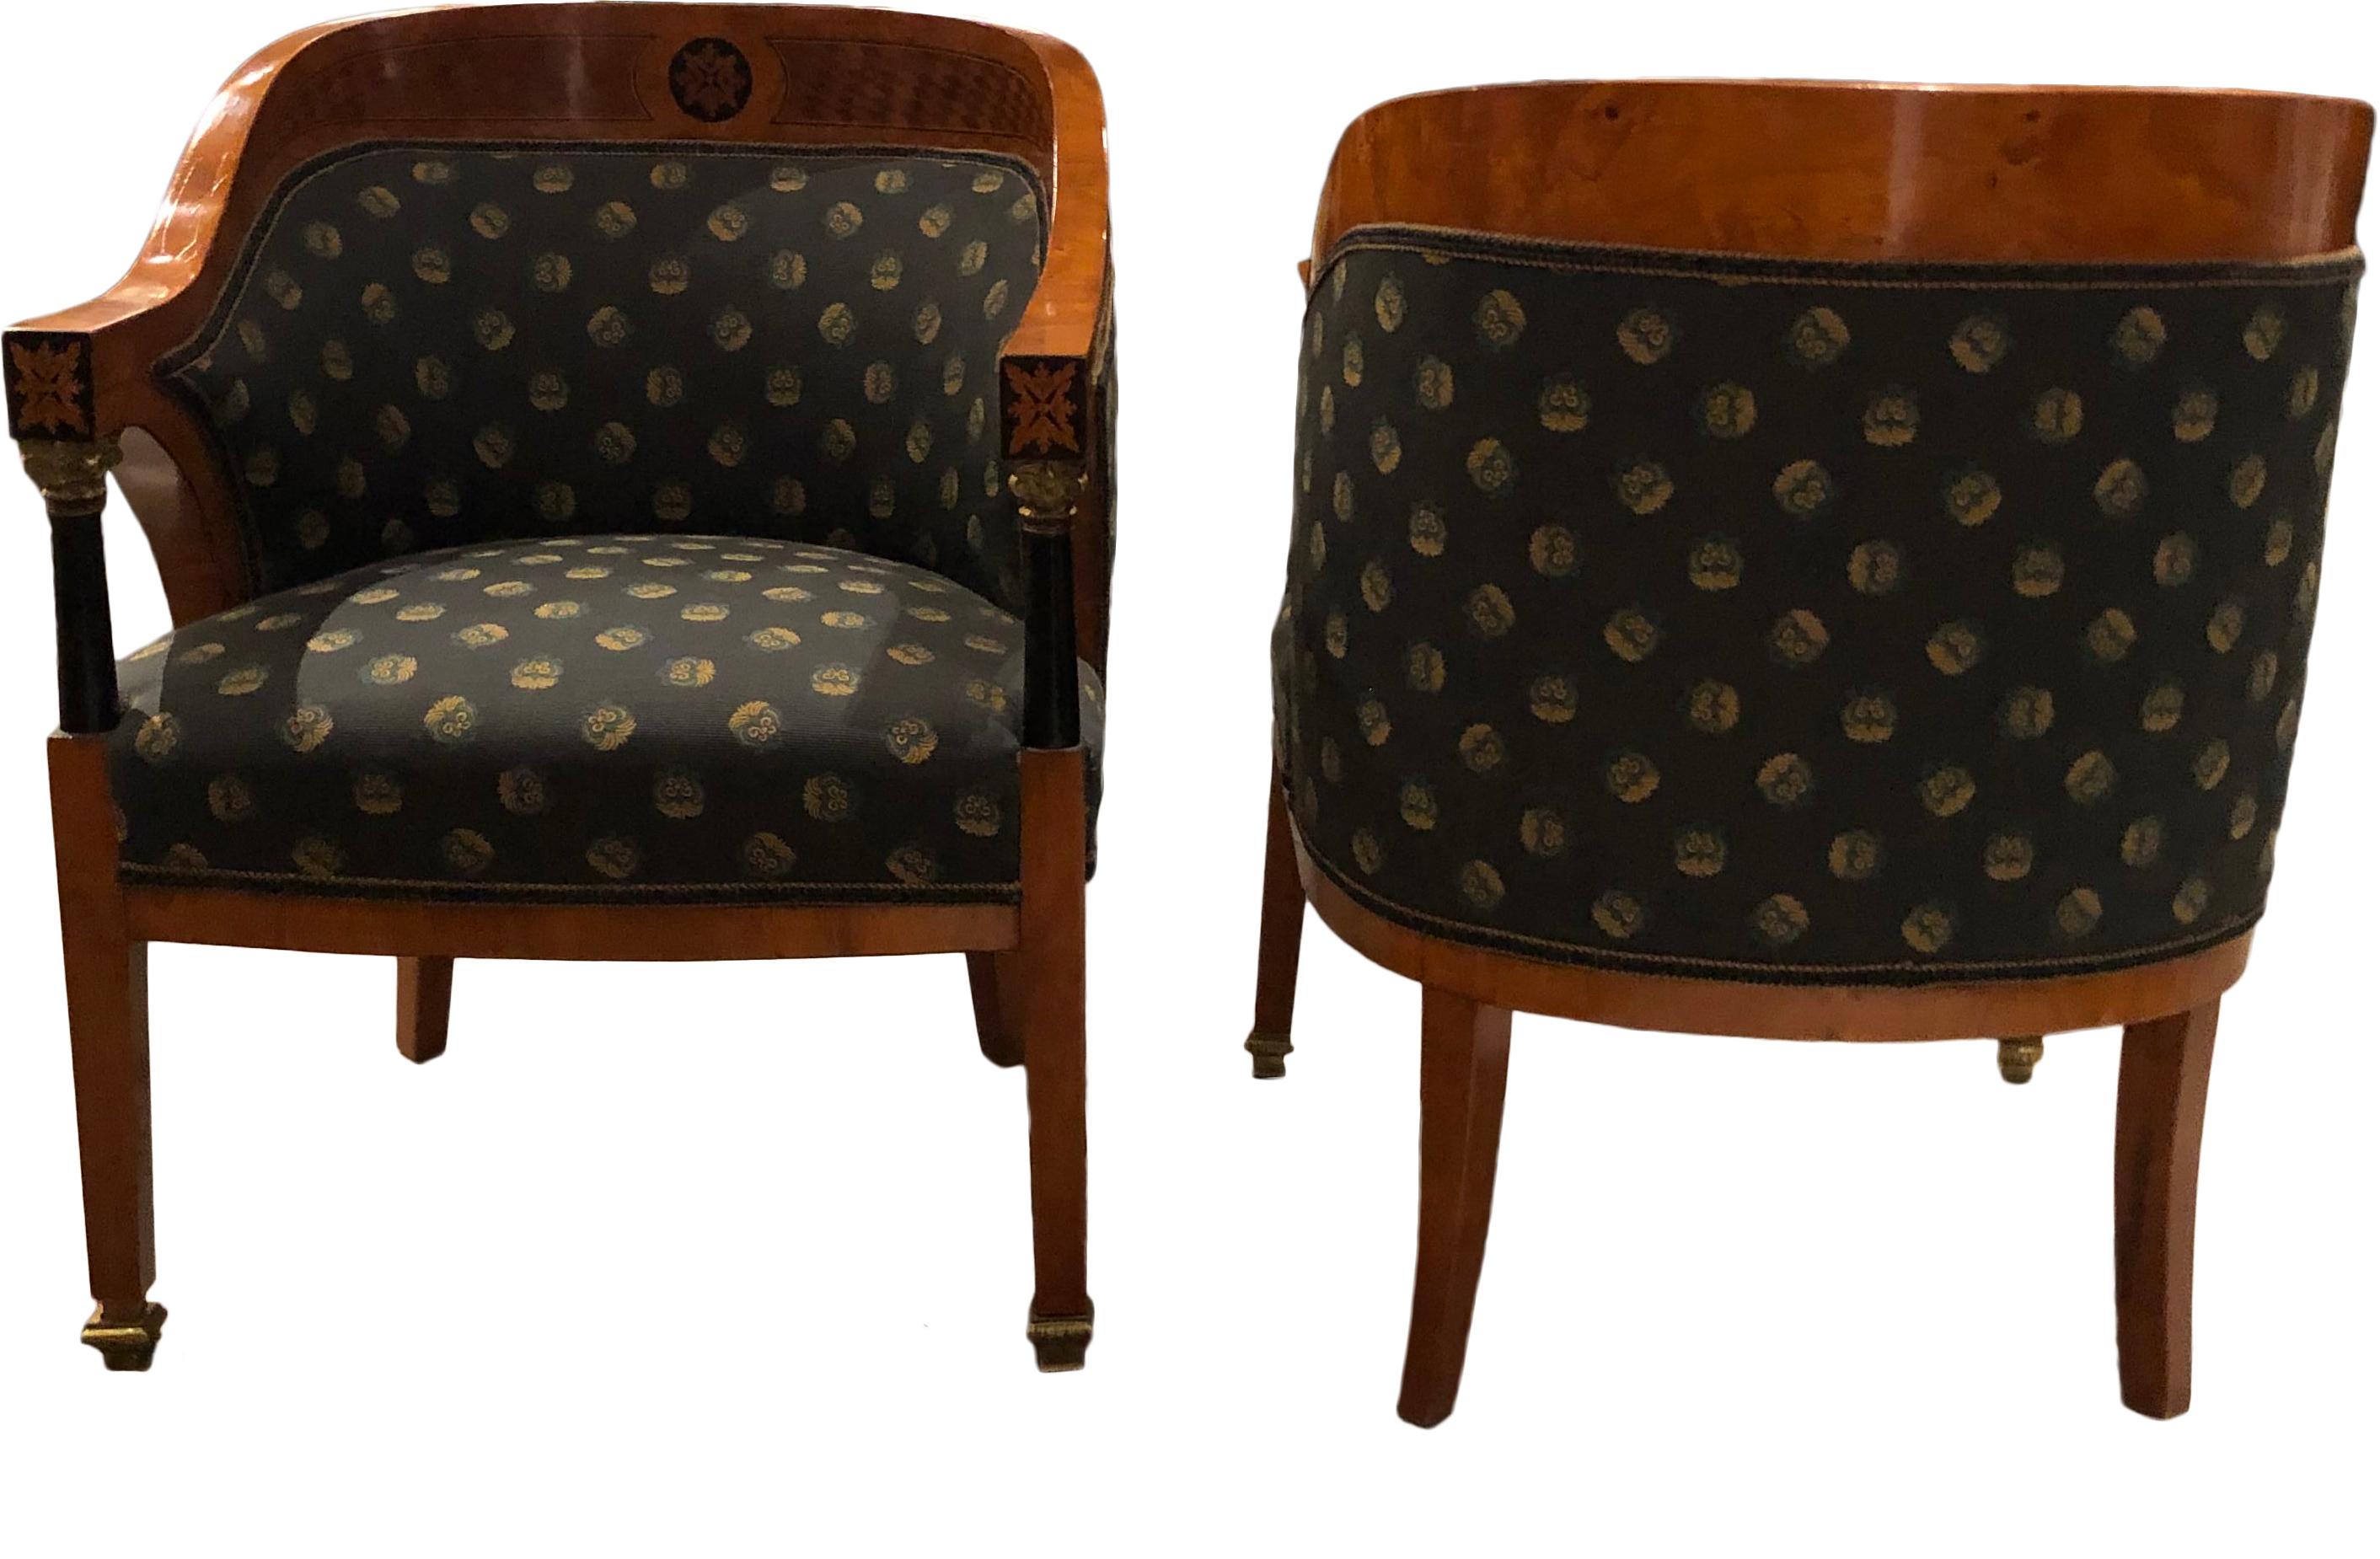 Walnut, rootwood and ebony with gilt bronze fittings. Slate blue upholstery with gold/teal floral pattern, circa 1890-1910. Part of suite with sofa E3/090.